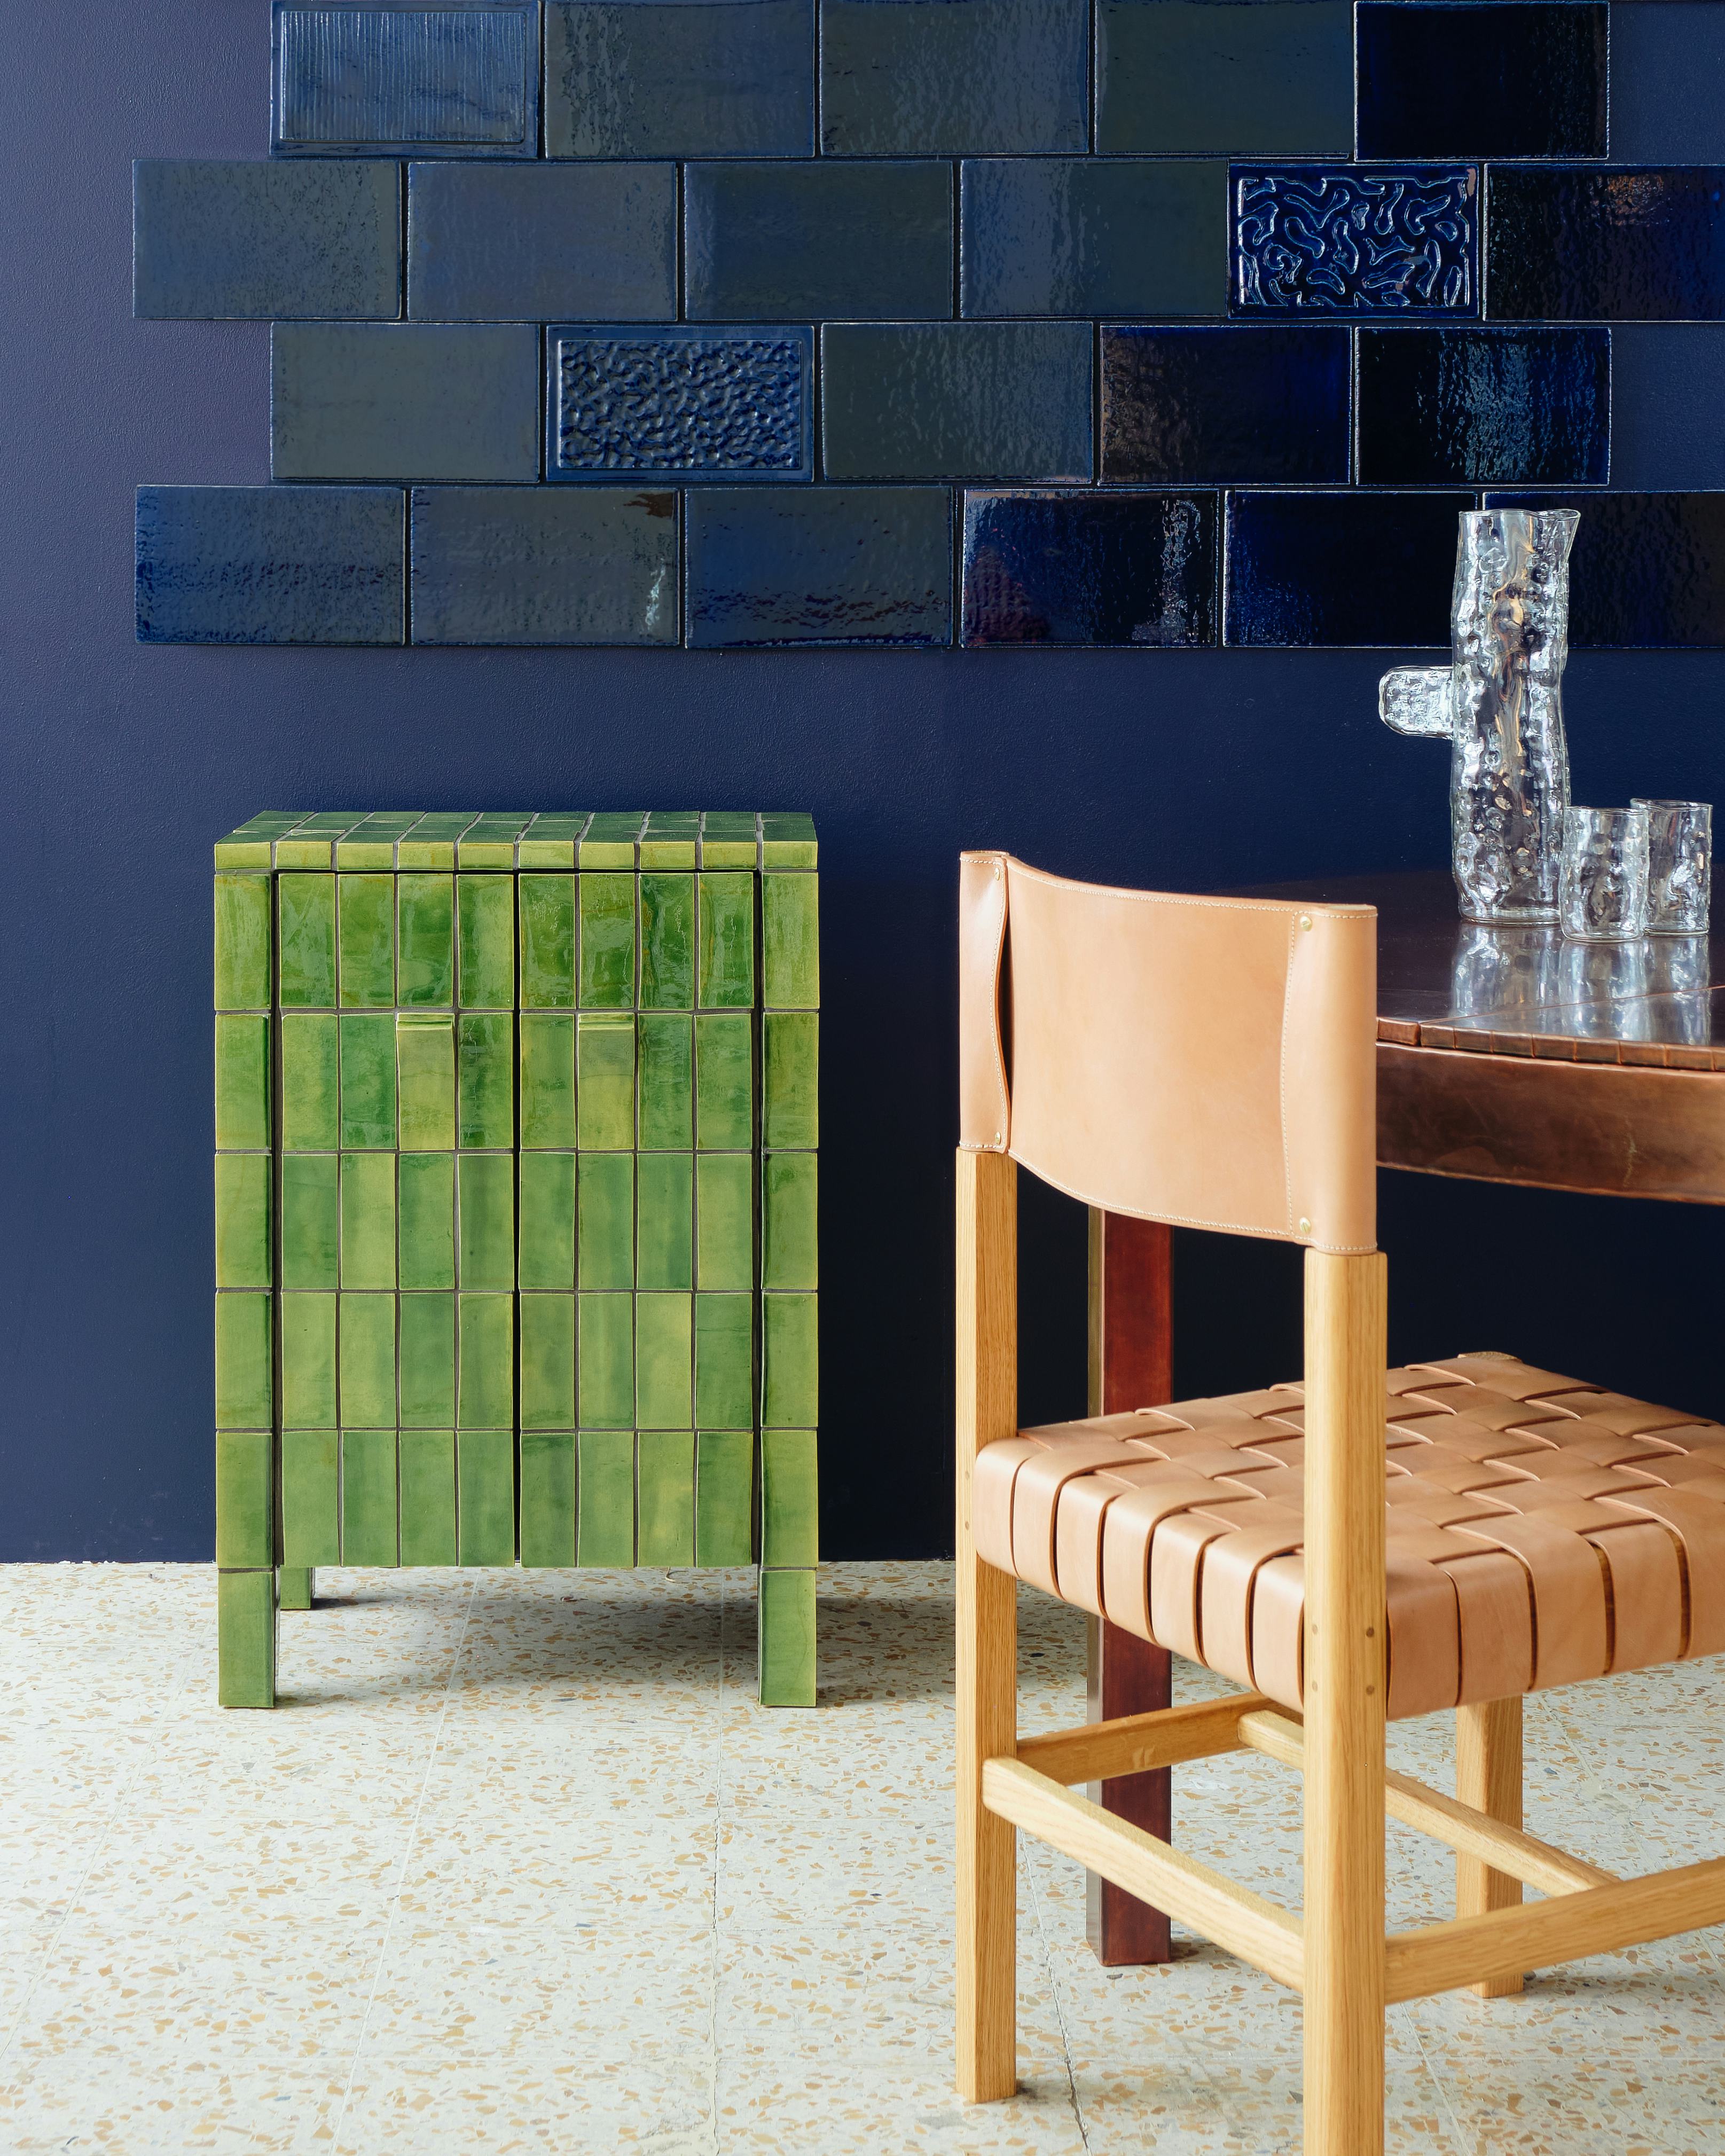 A green tiled cupboard in front of a blue tiled wall and next to a table and chair